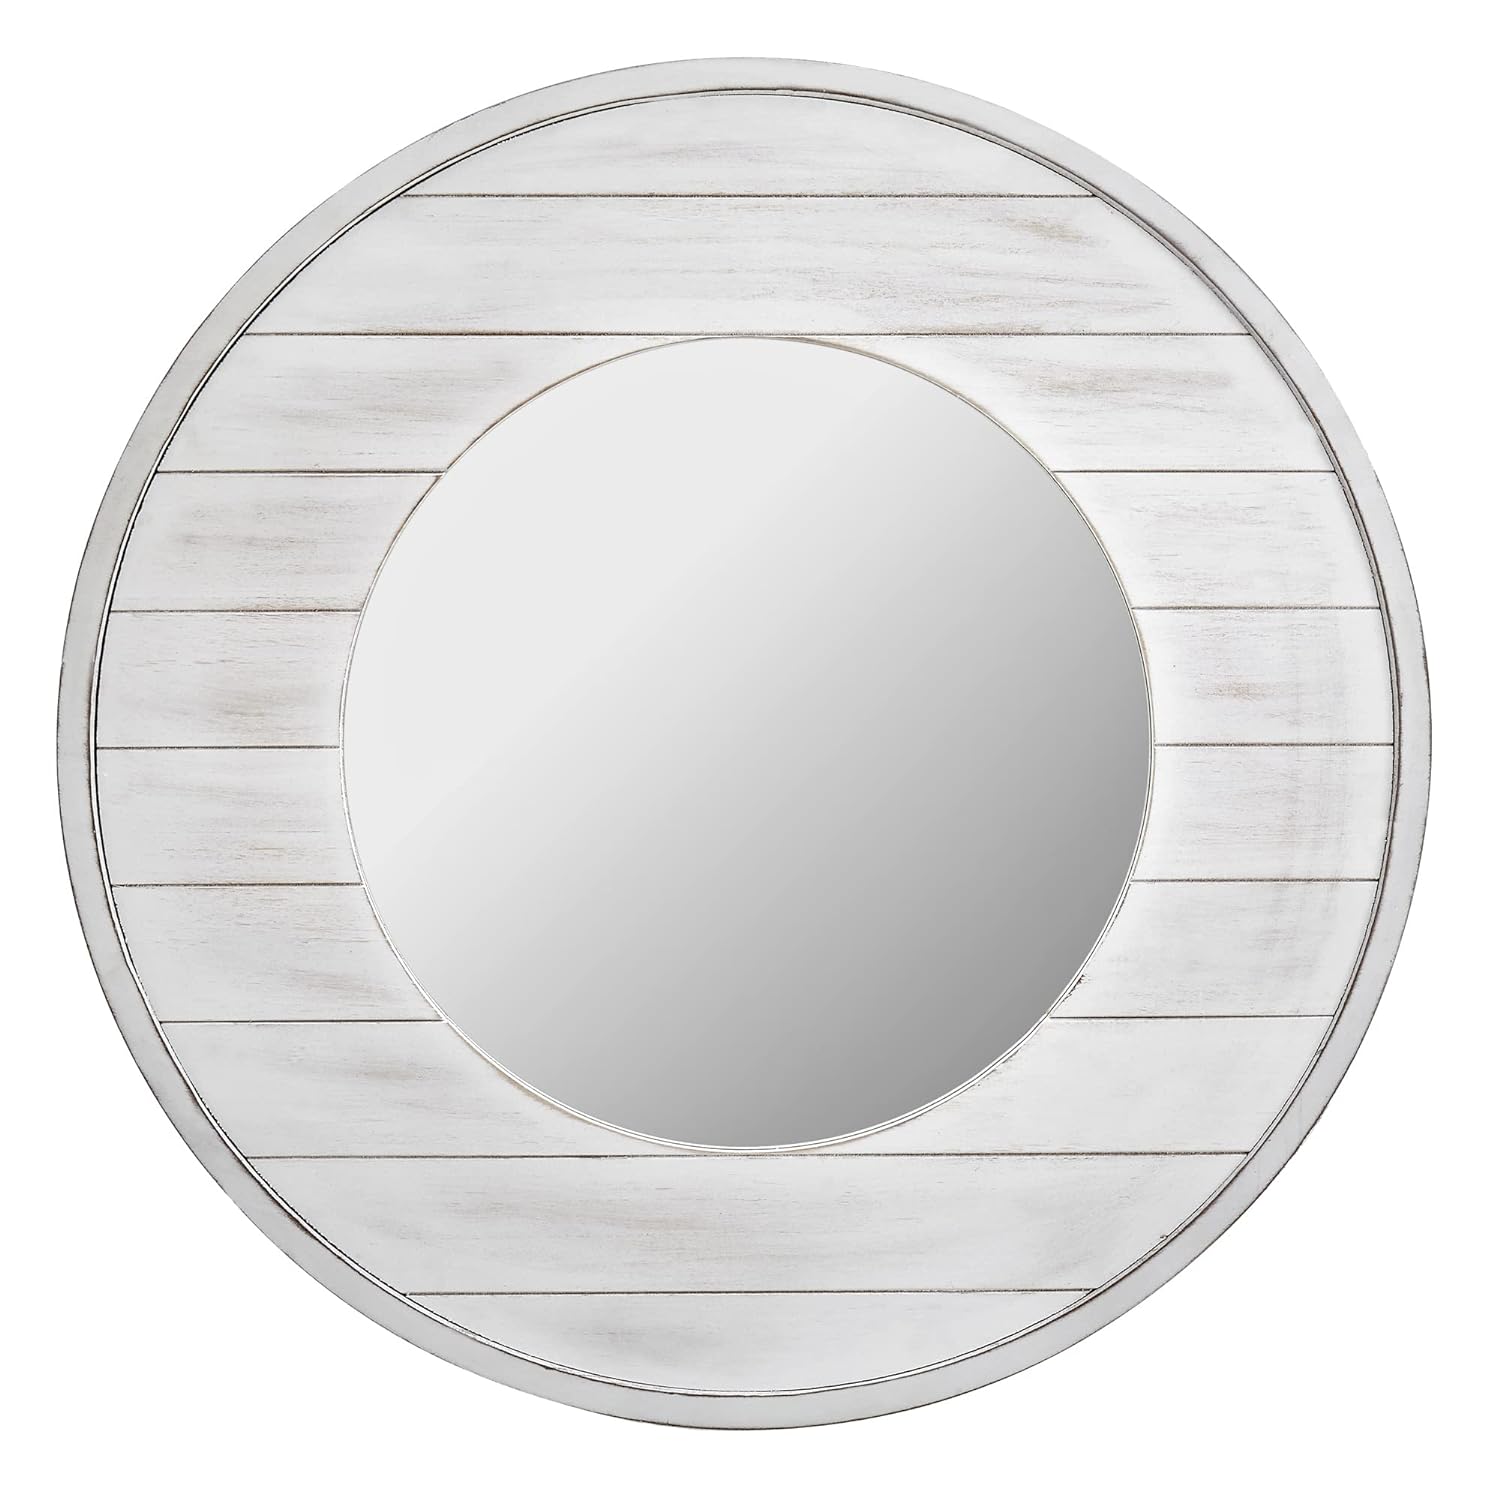 Great Choice Products Ellison Shiplap Accent Wall Mirror, 27", Aged White